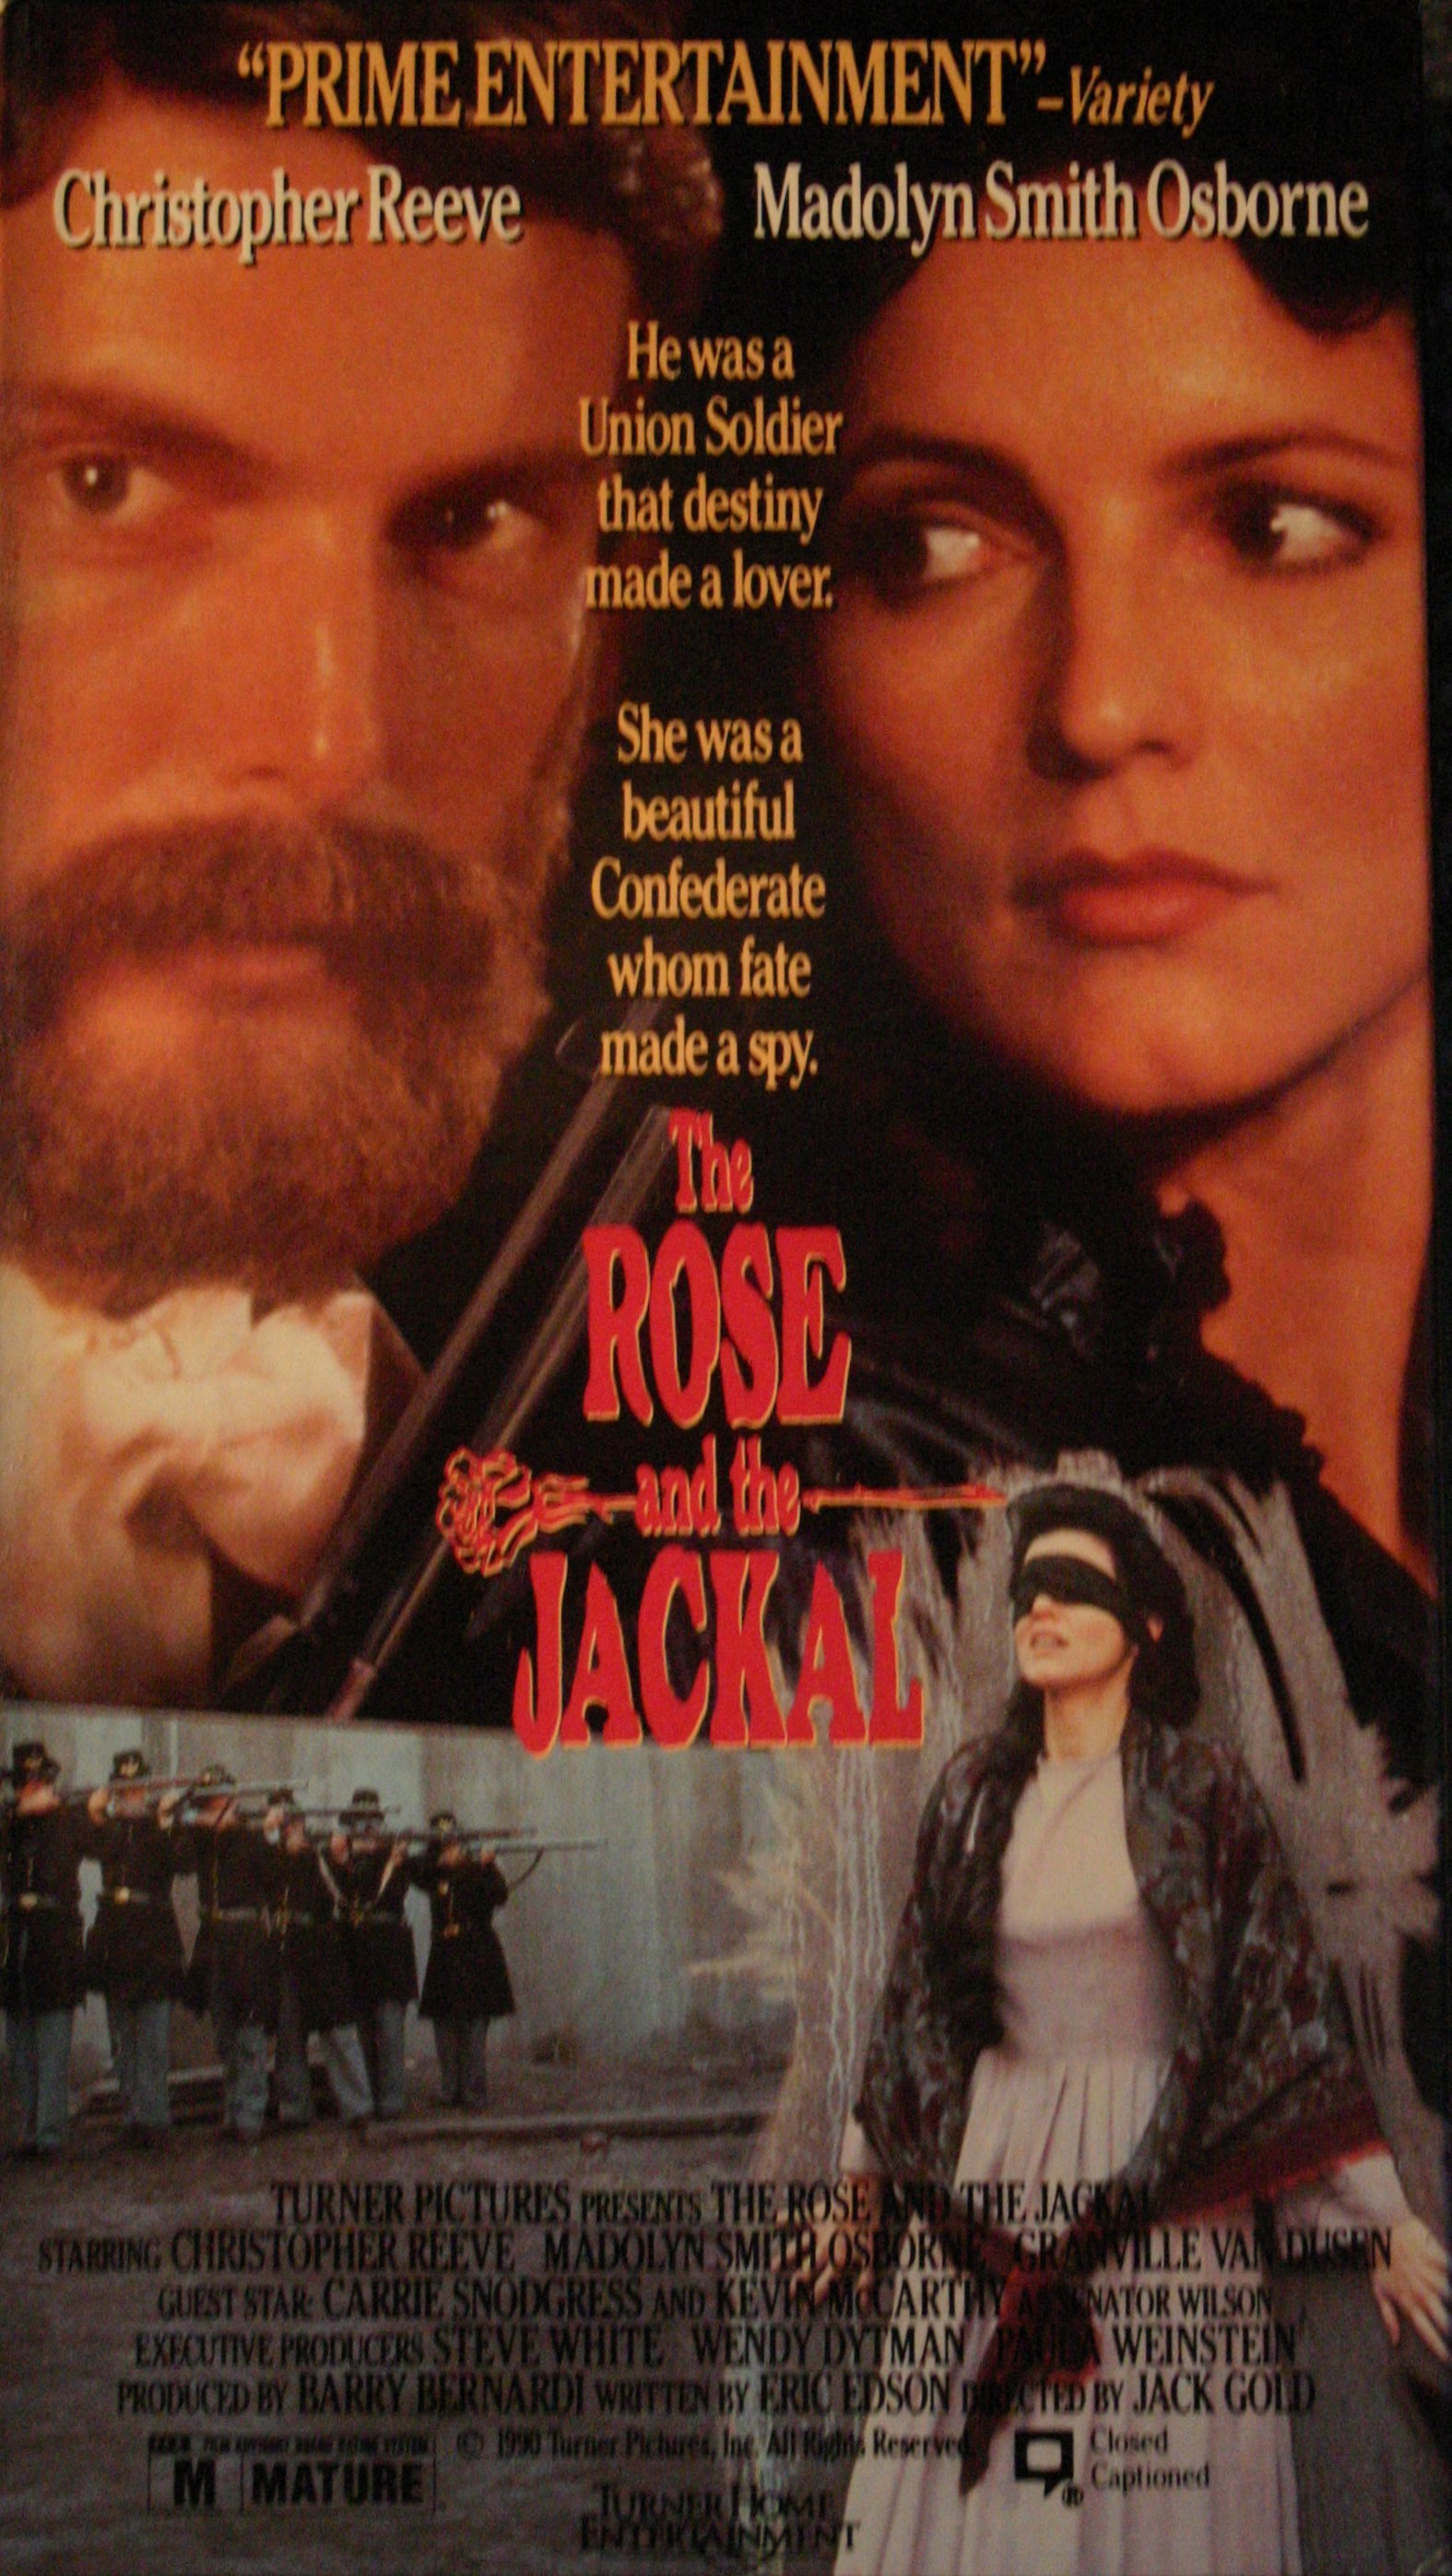 The Rose and the Jackal (1990) Screenshot 1